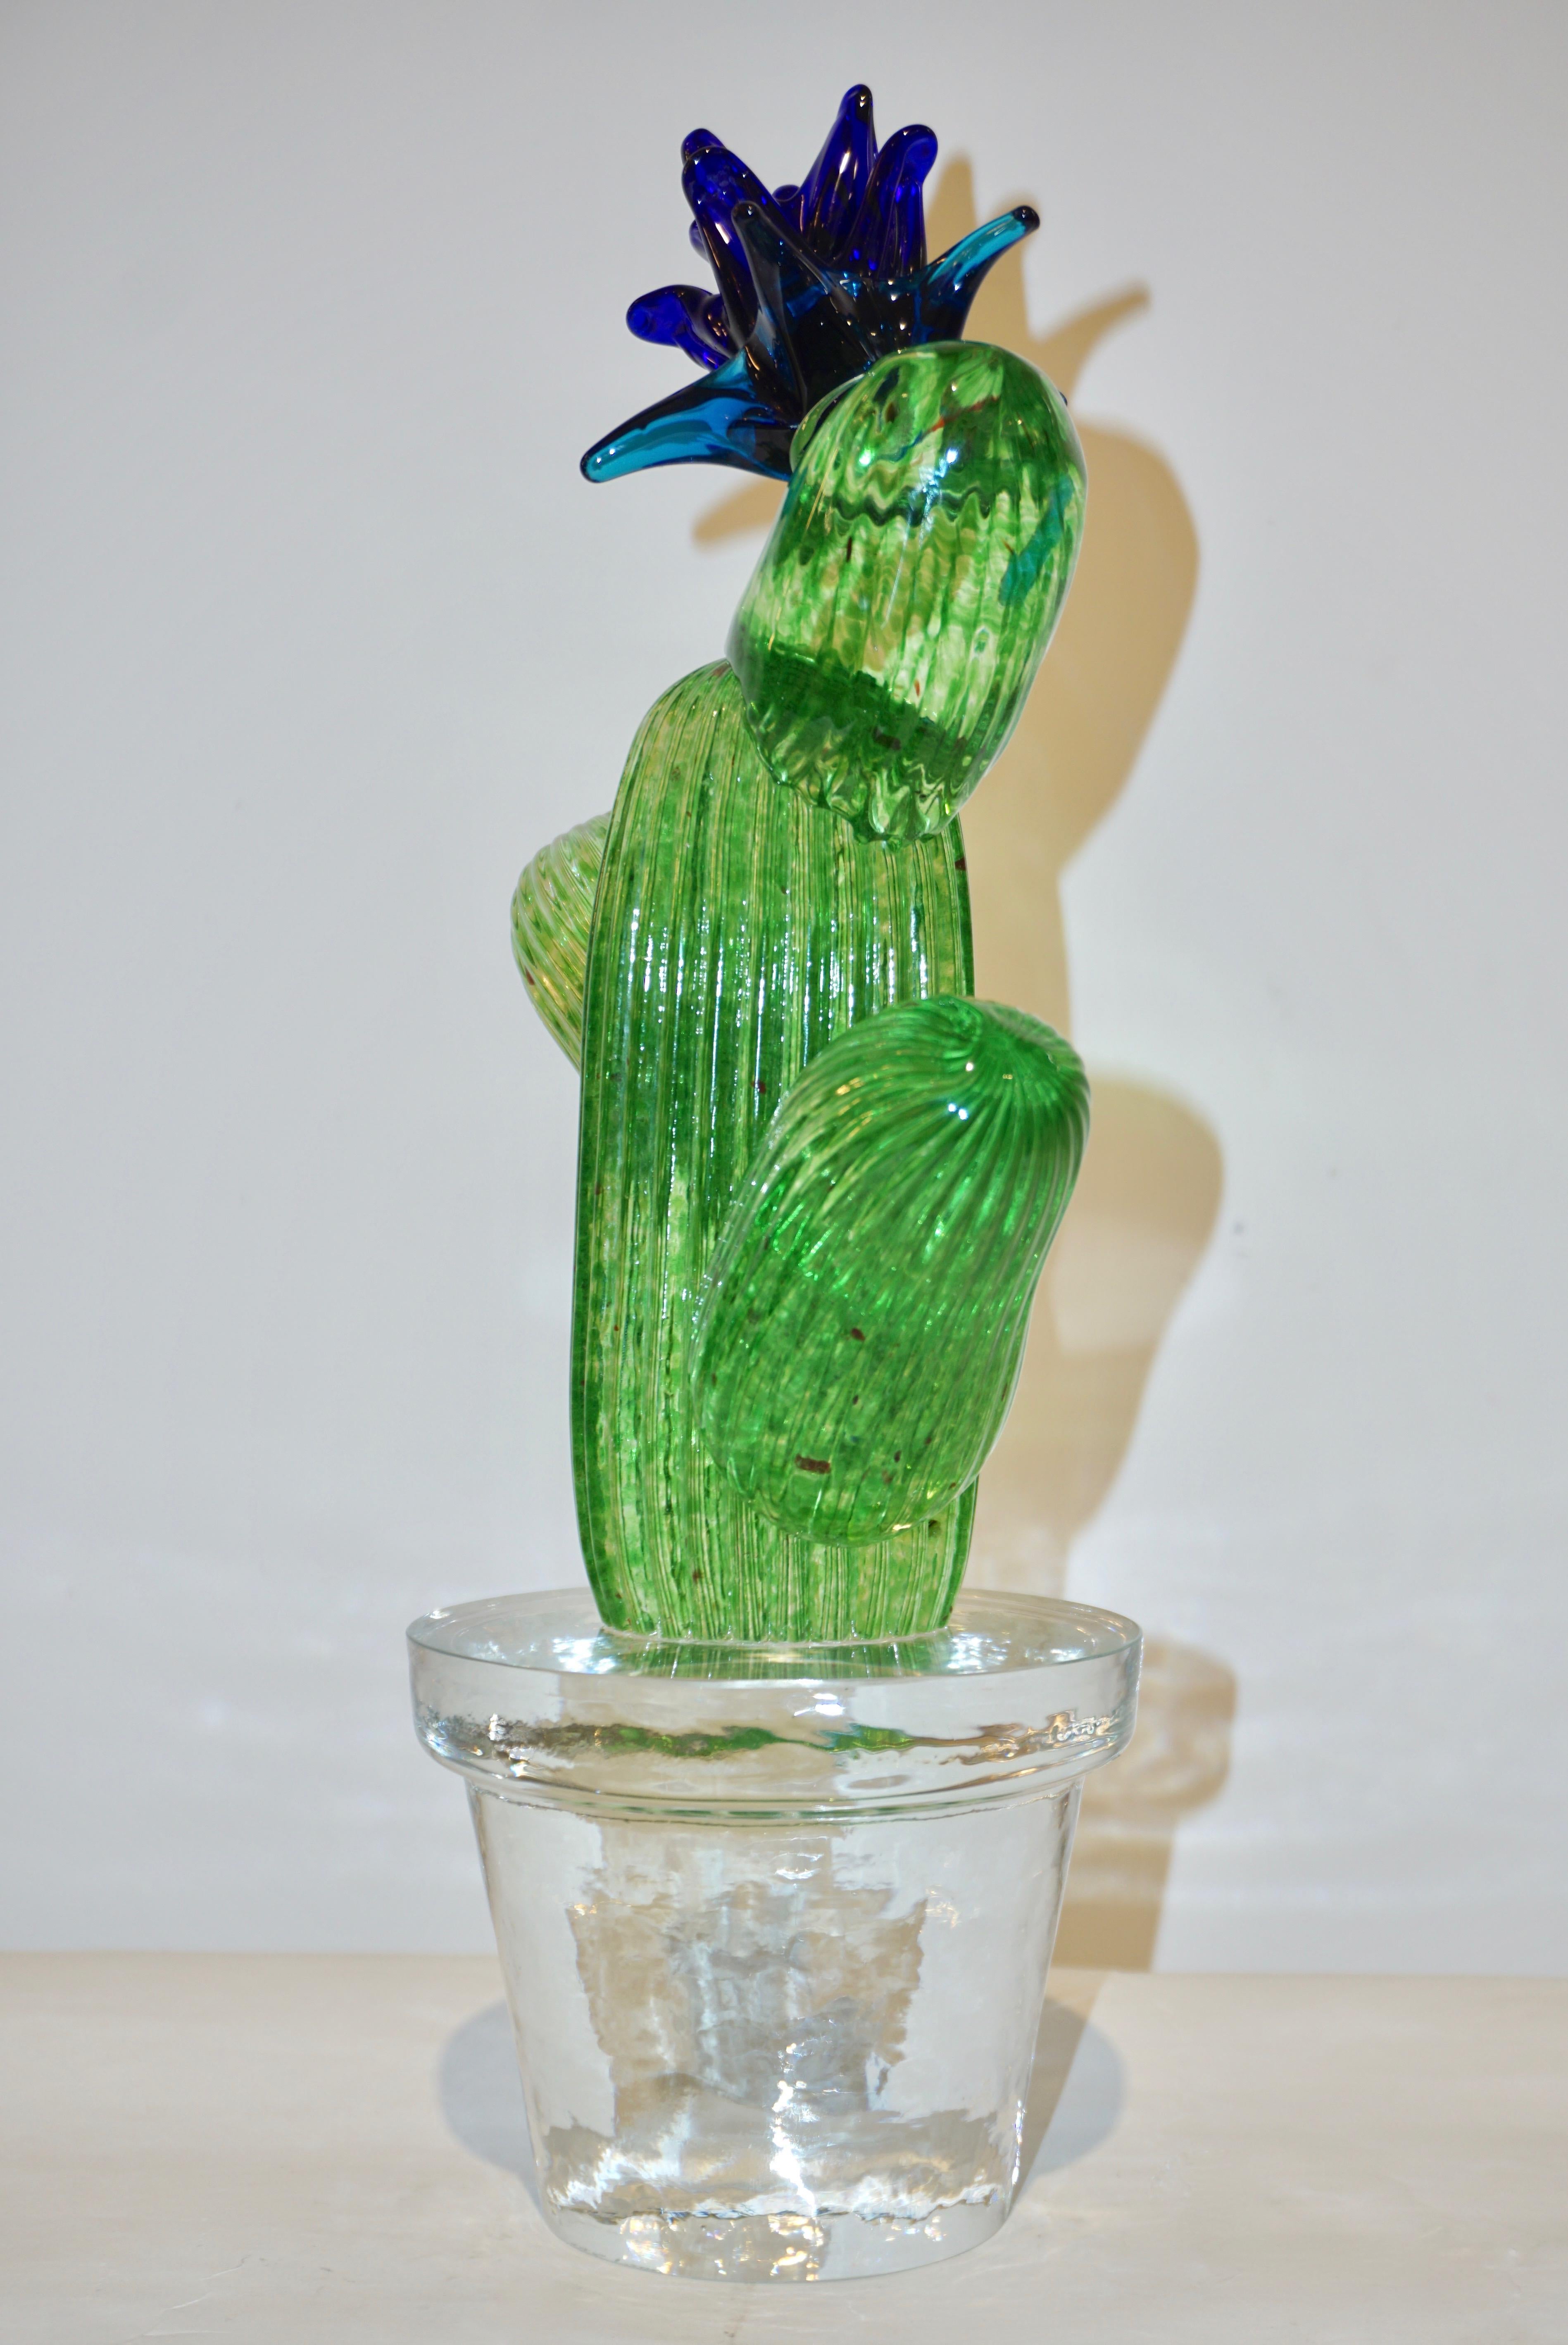 Late 20th Century Formia Marta Marzotto Vintage Limited Edition Murano Glass Blue Cactus Plant